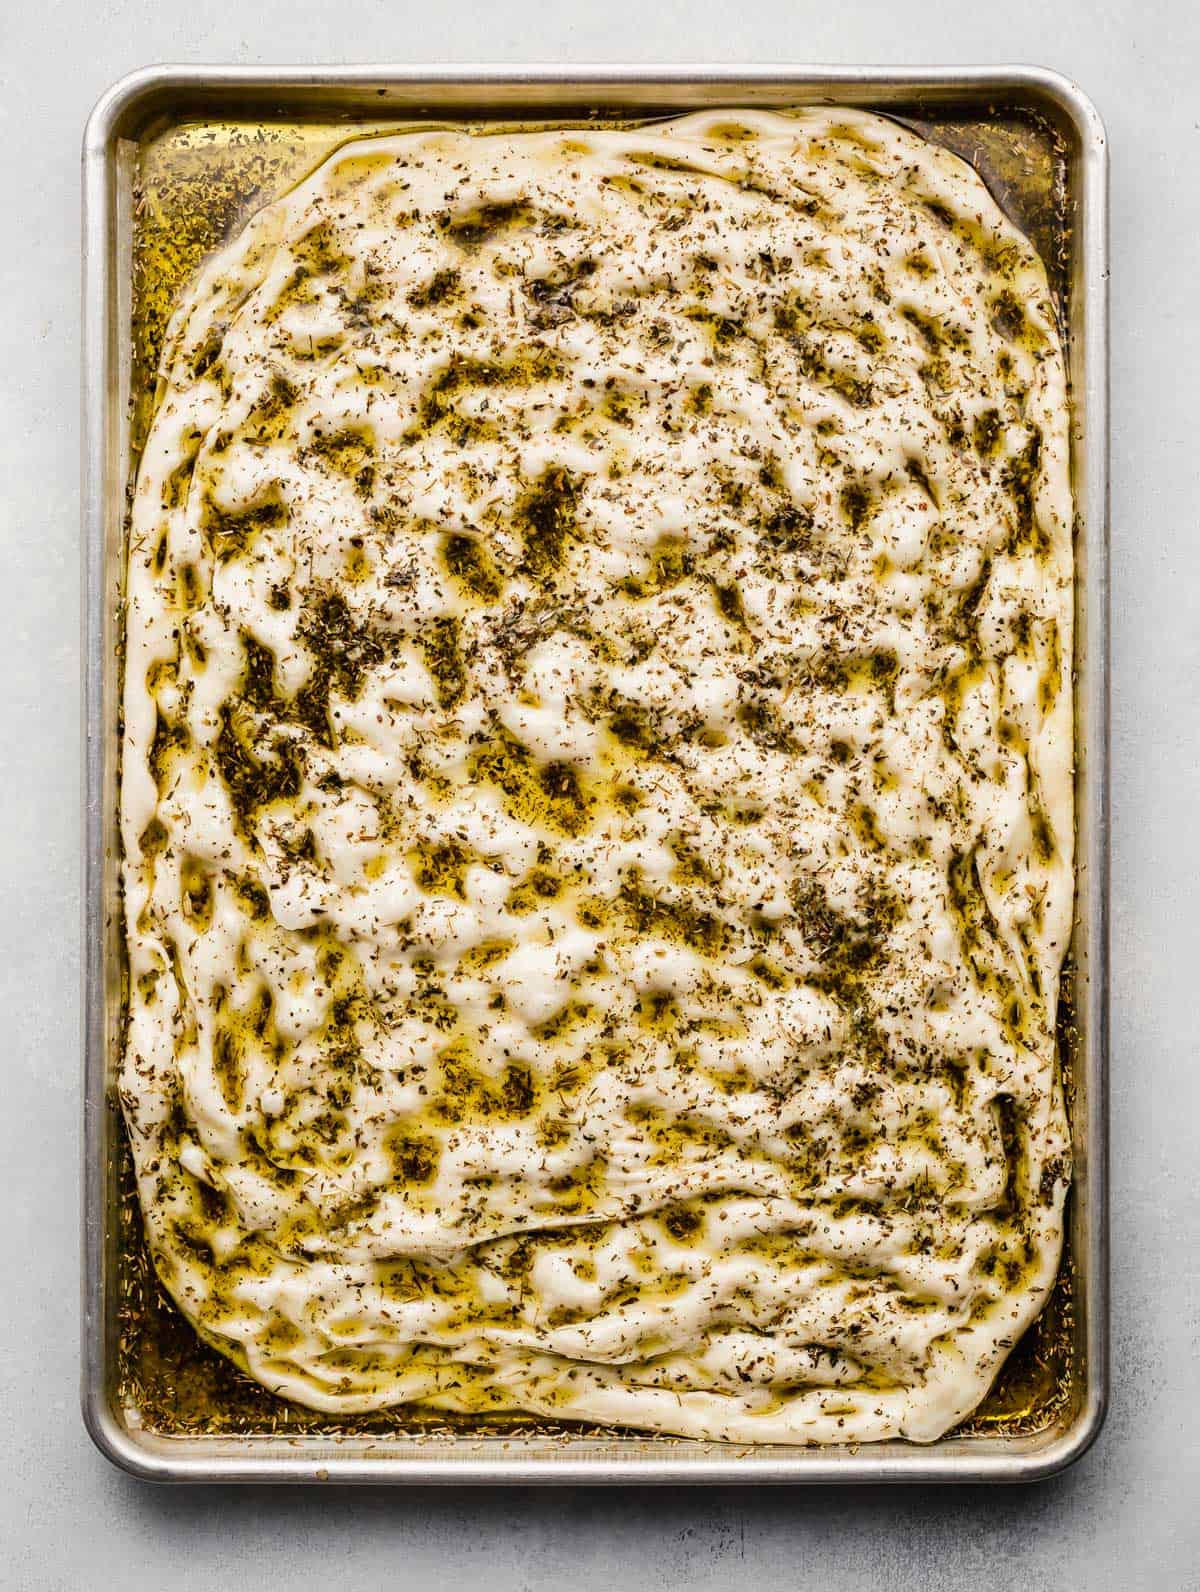 Raw focaccia bread dough dimpled and topped with herb oil on a baking sheet.